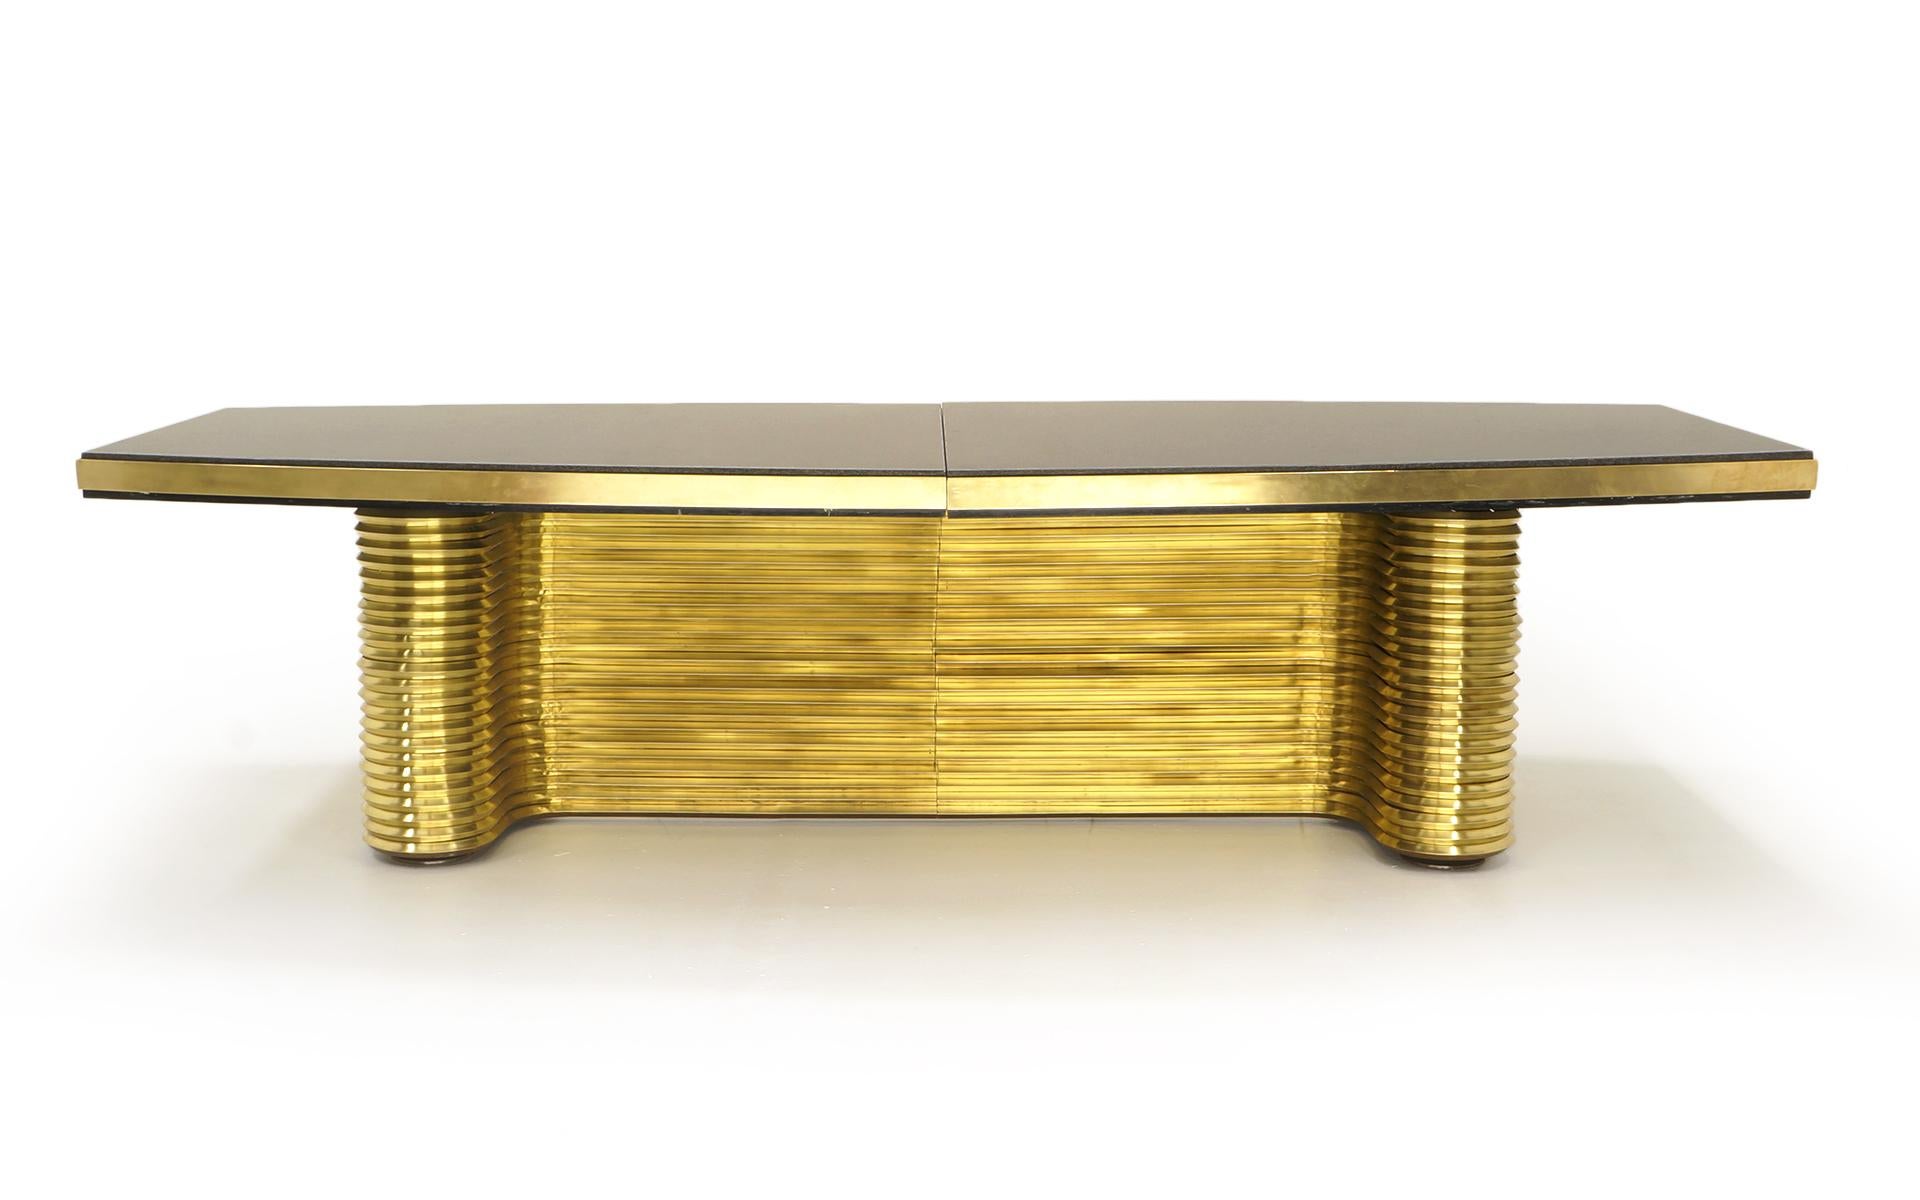 Stunning brass and granite table designed by Ed Moore, 1980s. The base is solid brass and steel. The two part top is charcoal granite framed in the solid brass skirt. This table is almost ten feet long. This is a seriously impressive and beautiful